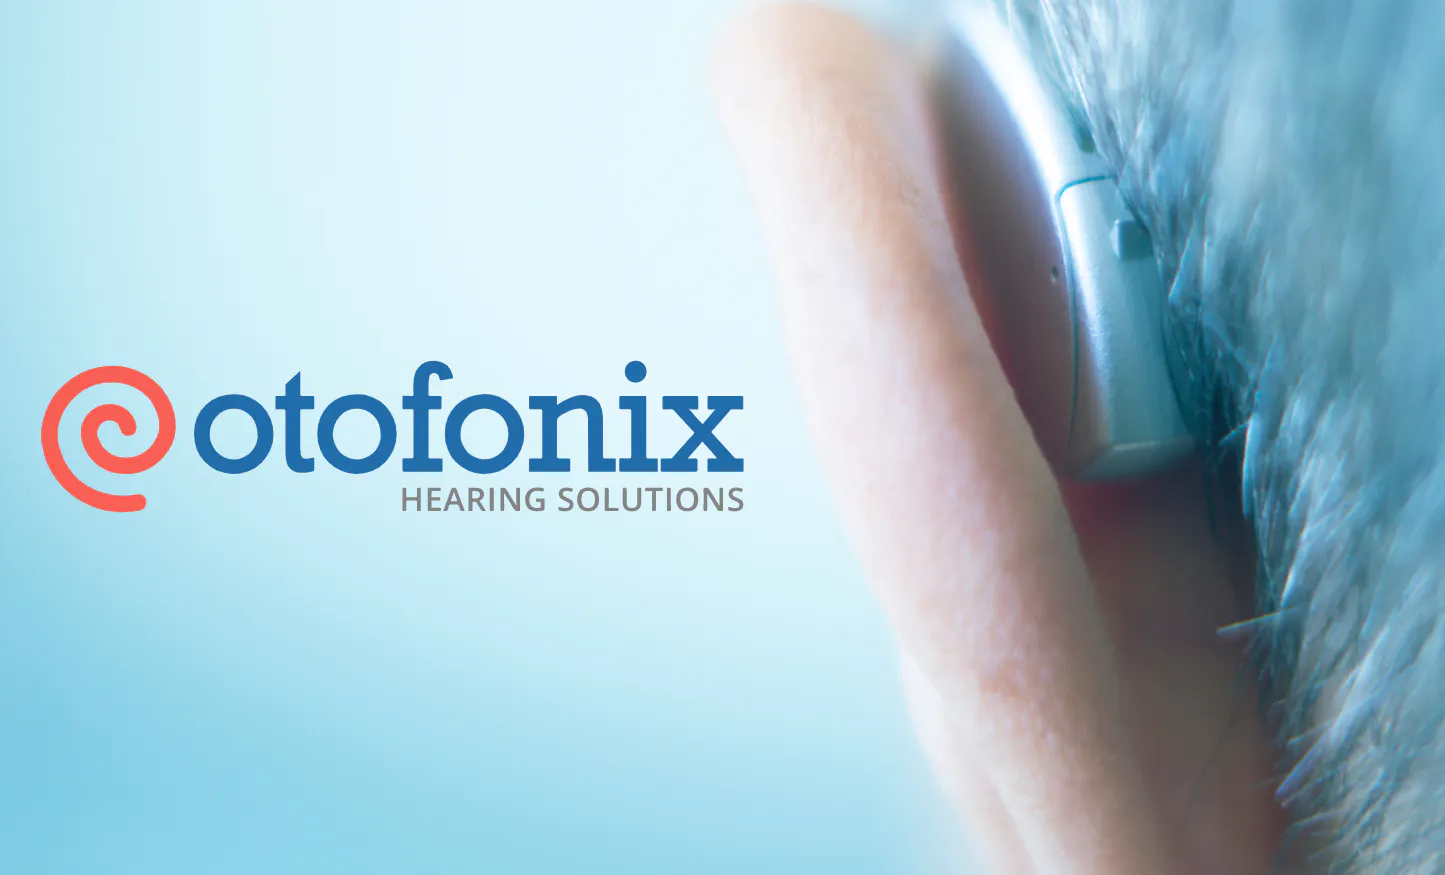 Access exclusive deals, coupons, offers and cashback on Improve Your Hearing with Otofonix Hearing Solutions through OODLZ courtesy of Otofonix Hearing Solutions.